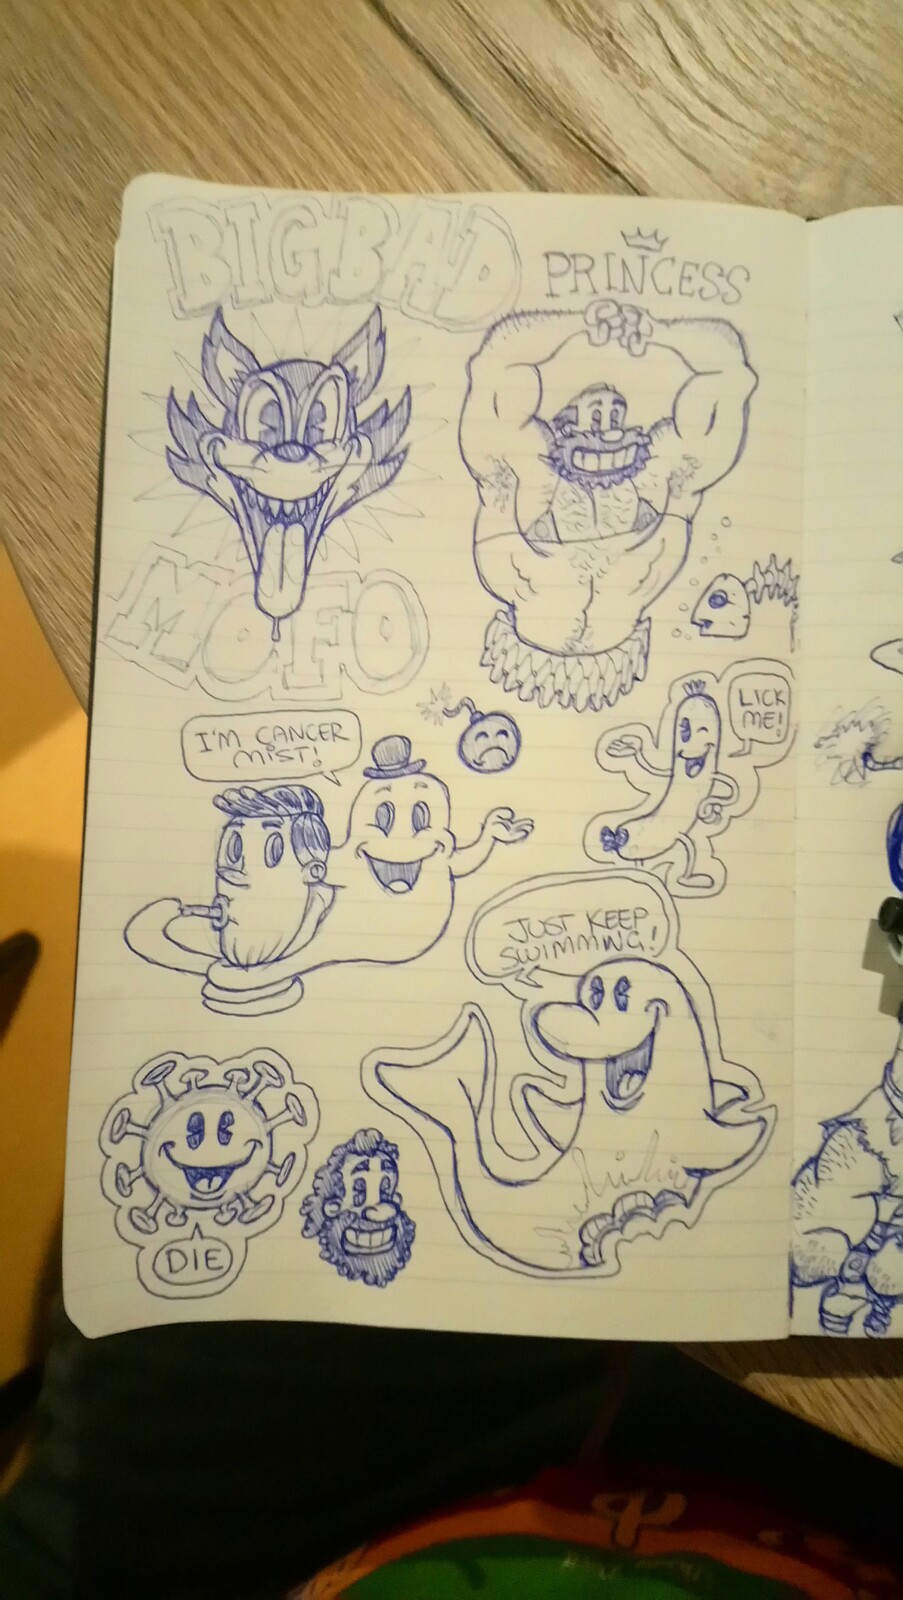 Initial sketches